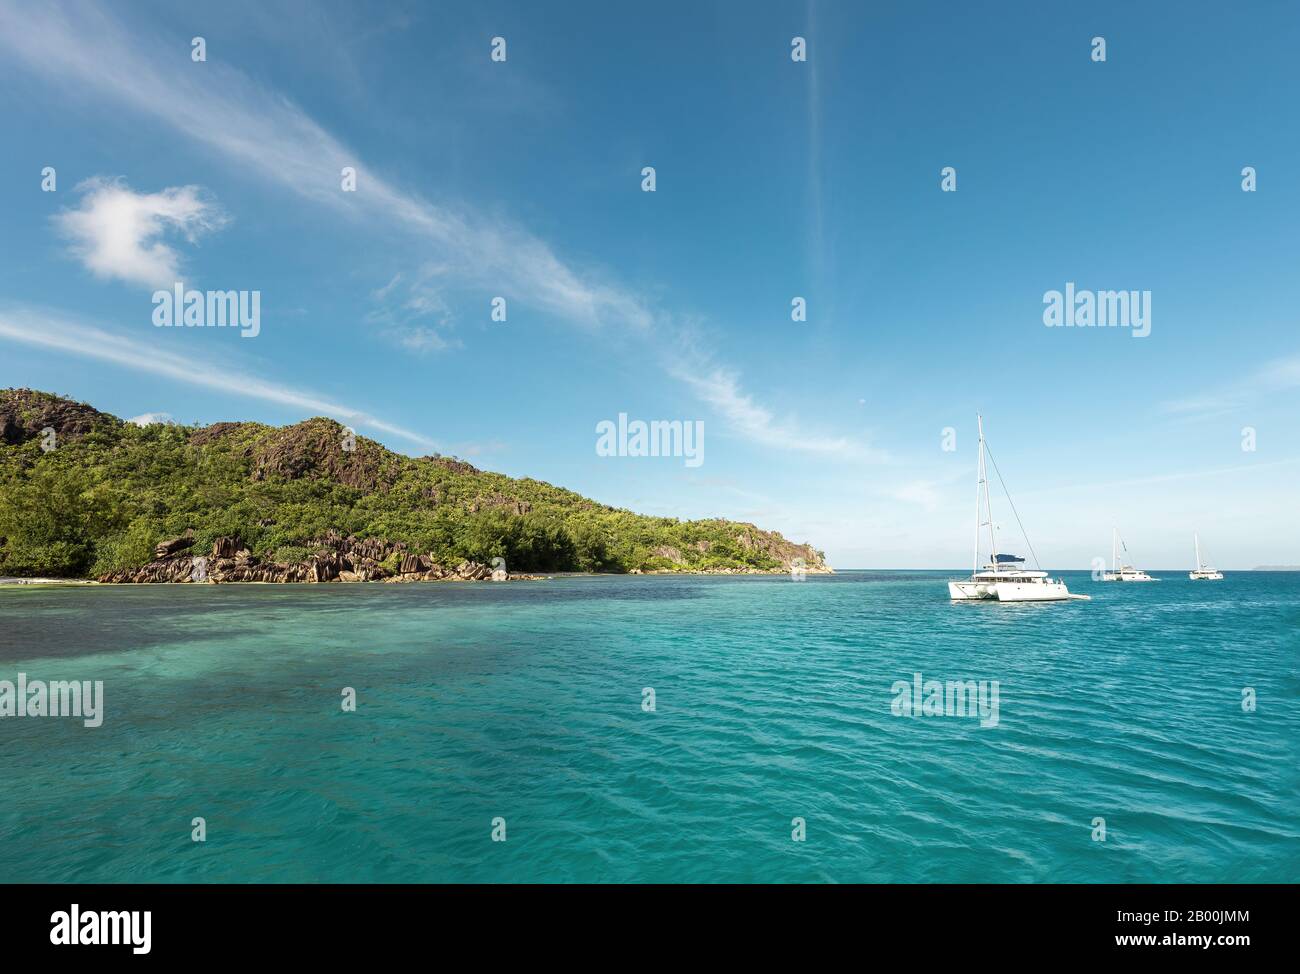 Catamarans in a Bay near Curieuse Island in the Seychelles to the north coast of the island of Praslin Stock Photo